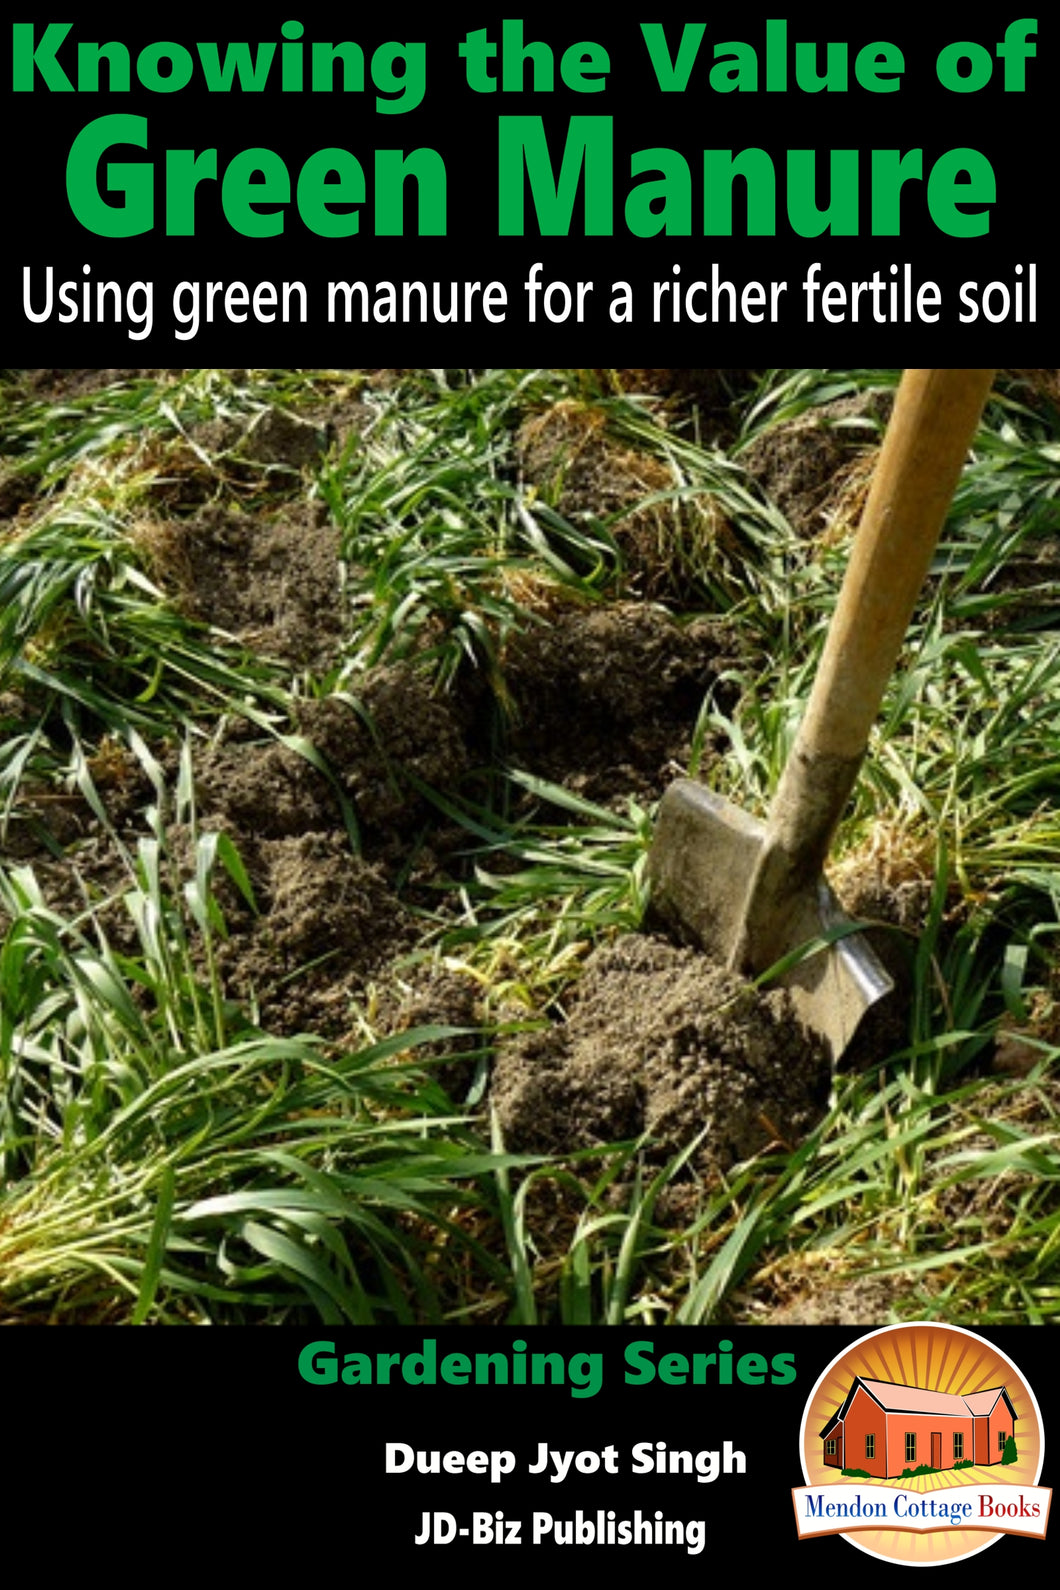 Knowing the Value of Green Manure